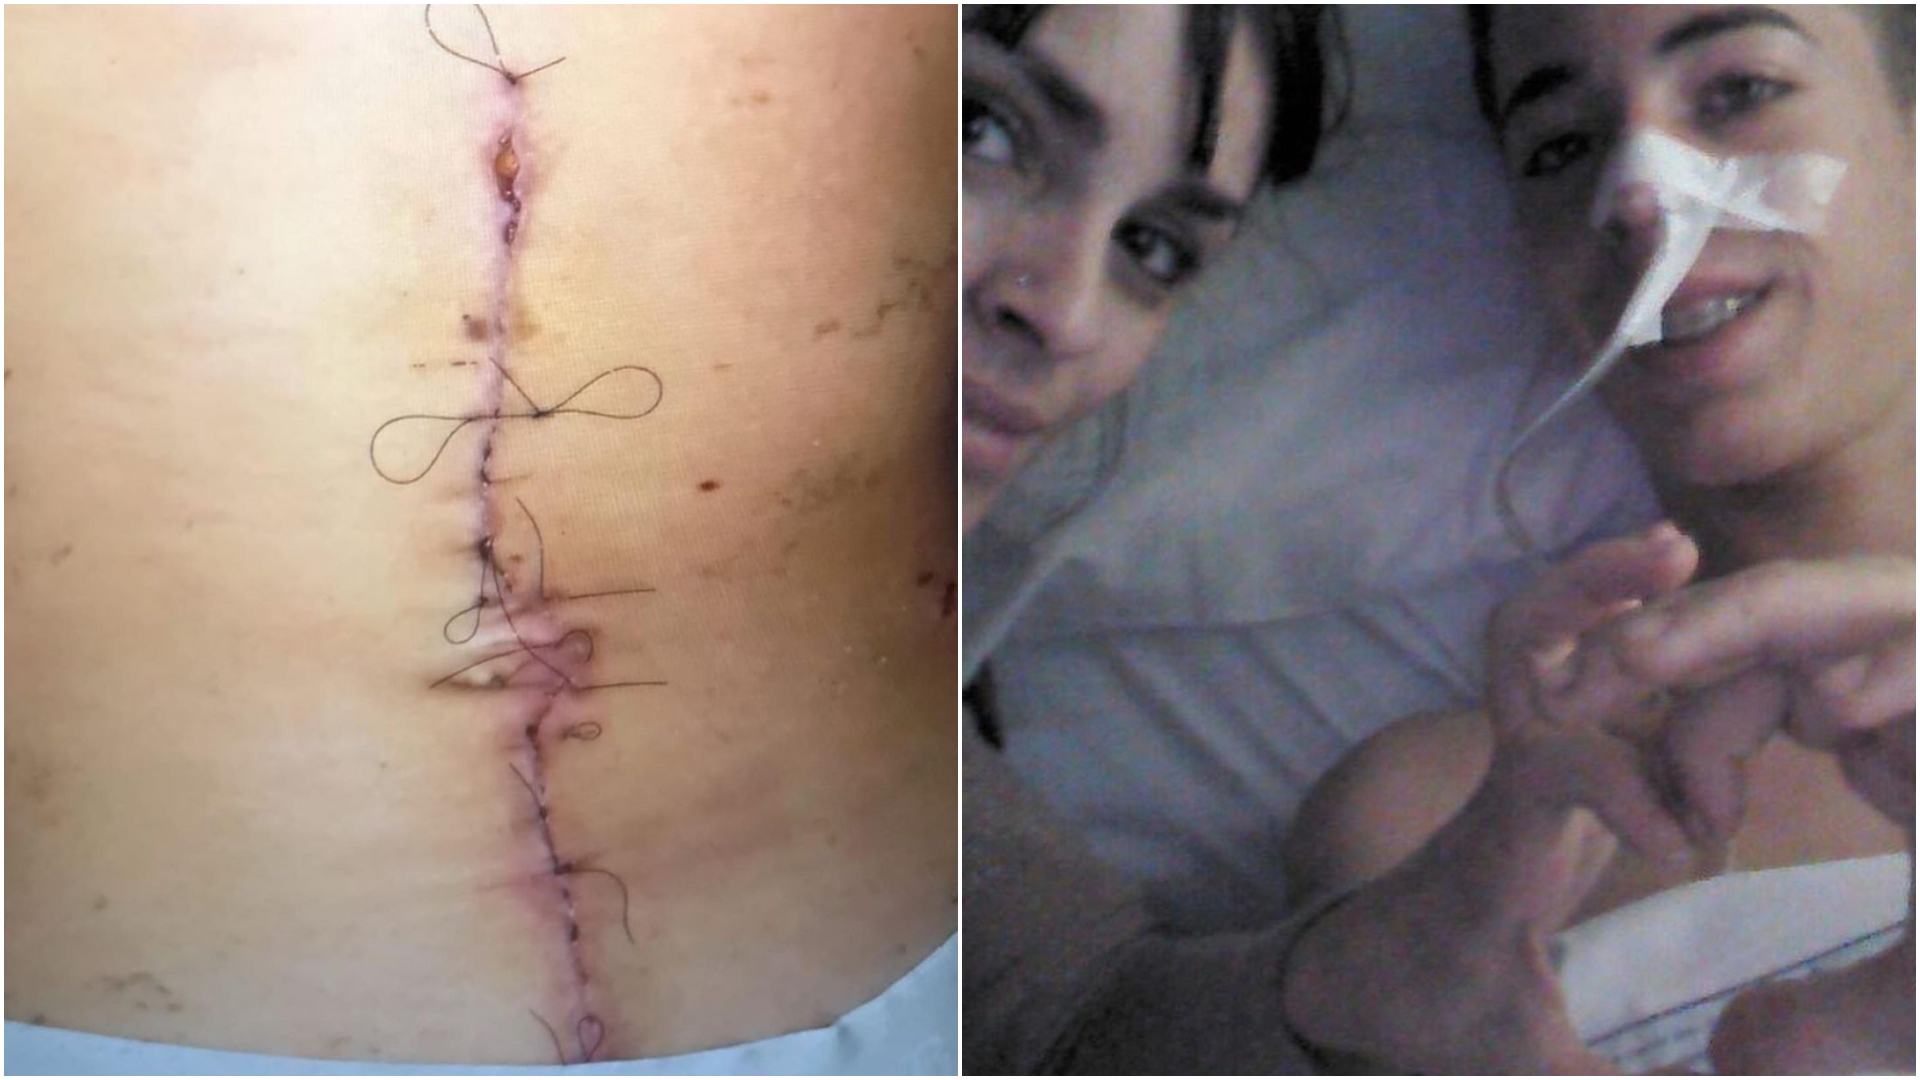 Singer Reveals More Photos Of Scars Left By A Motorcycle Accident At Age 17